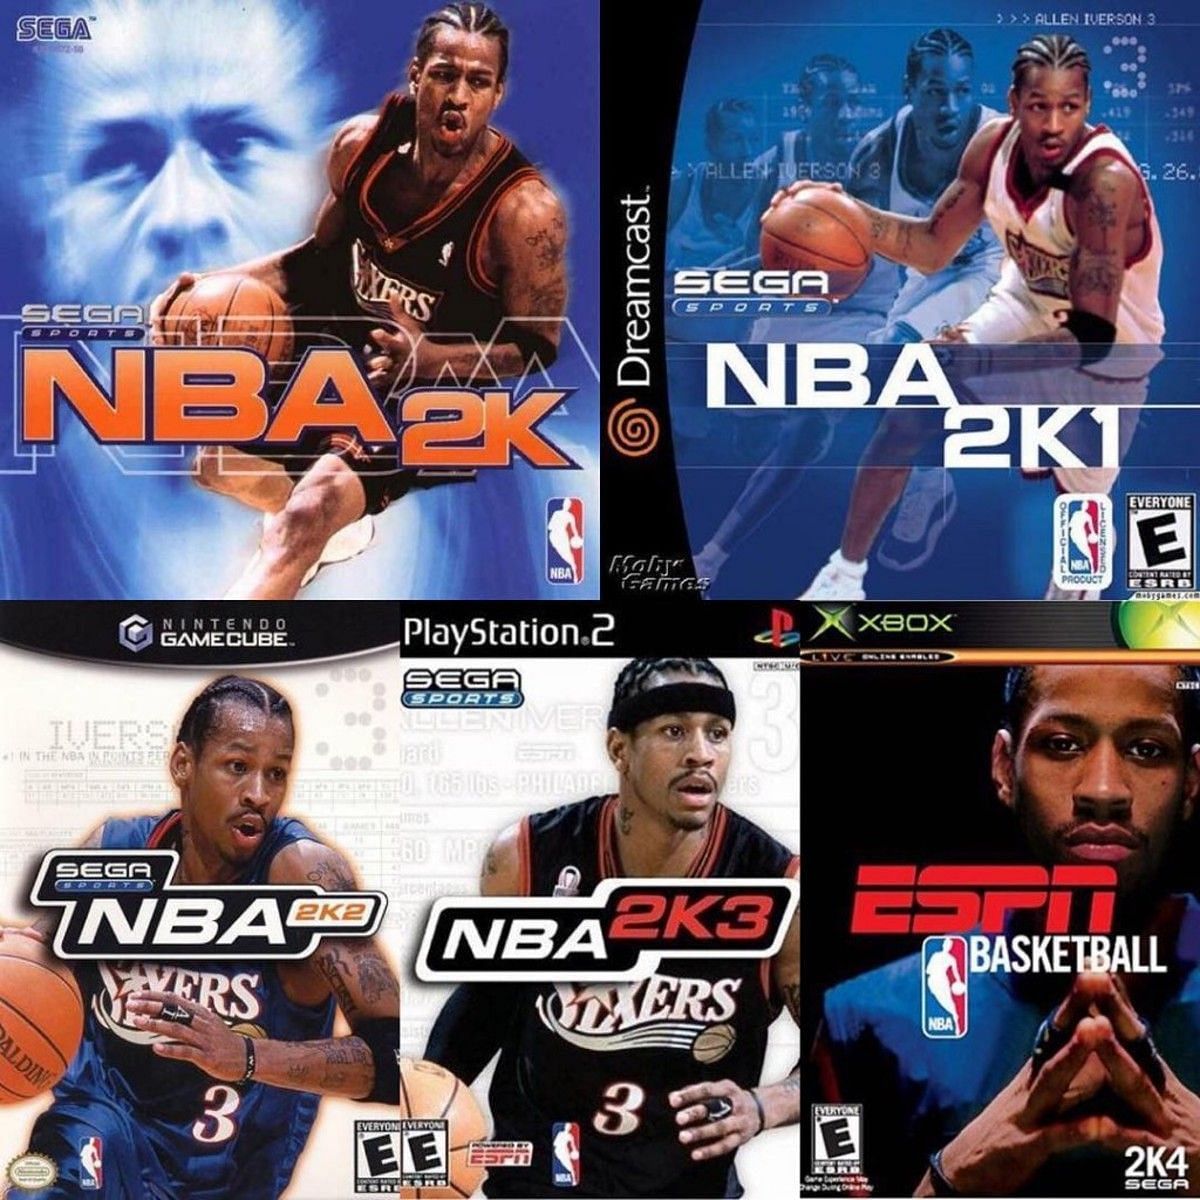 Allen Iverson on the cover of 2K over the years